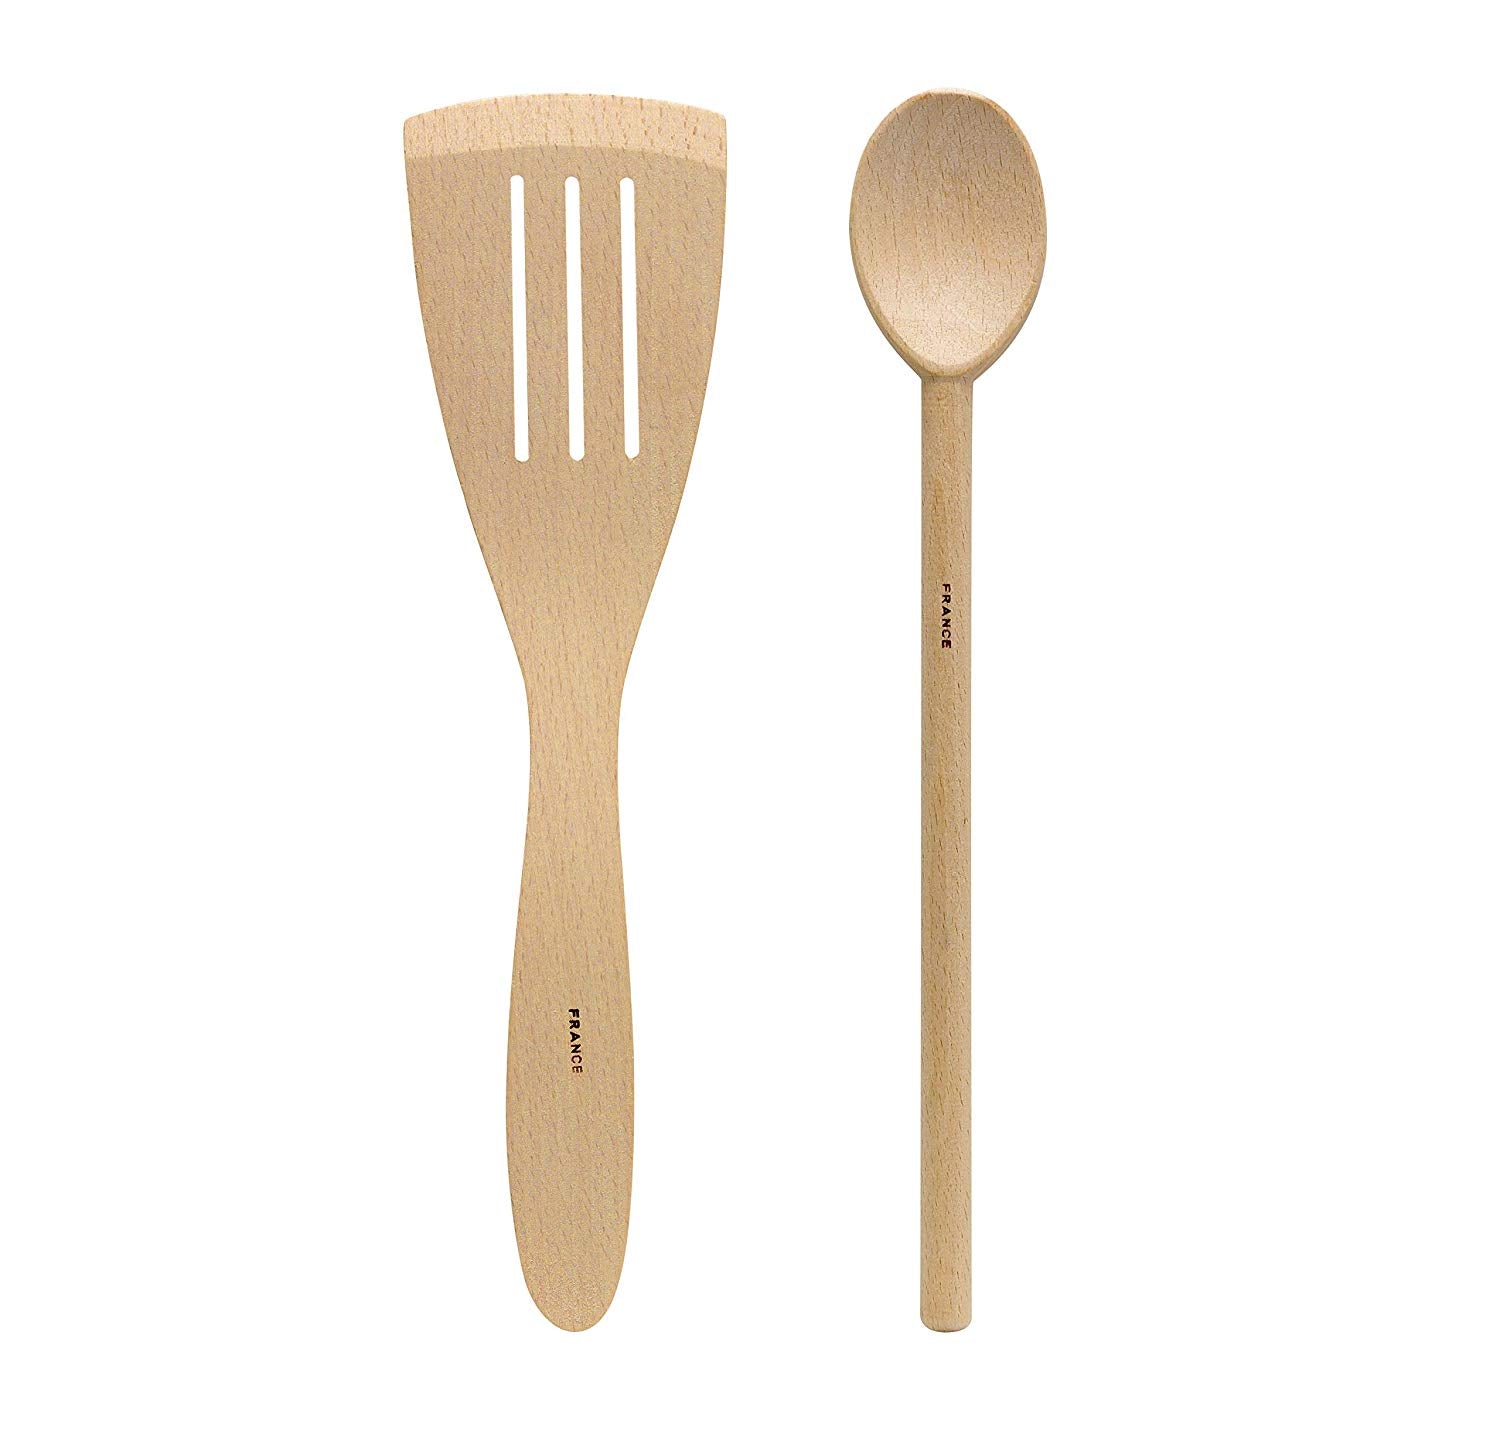 HIC French Beechwood Classic Spoon and Slotted Spatula, Made in France, 12-Inch, Set of 2